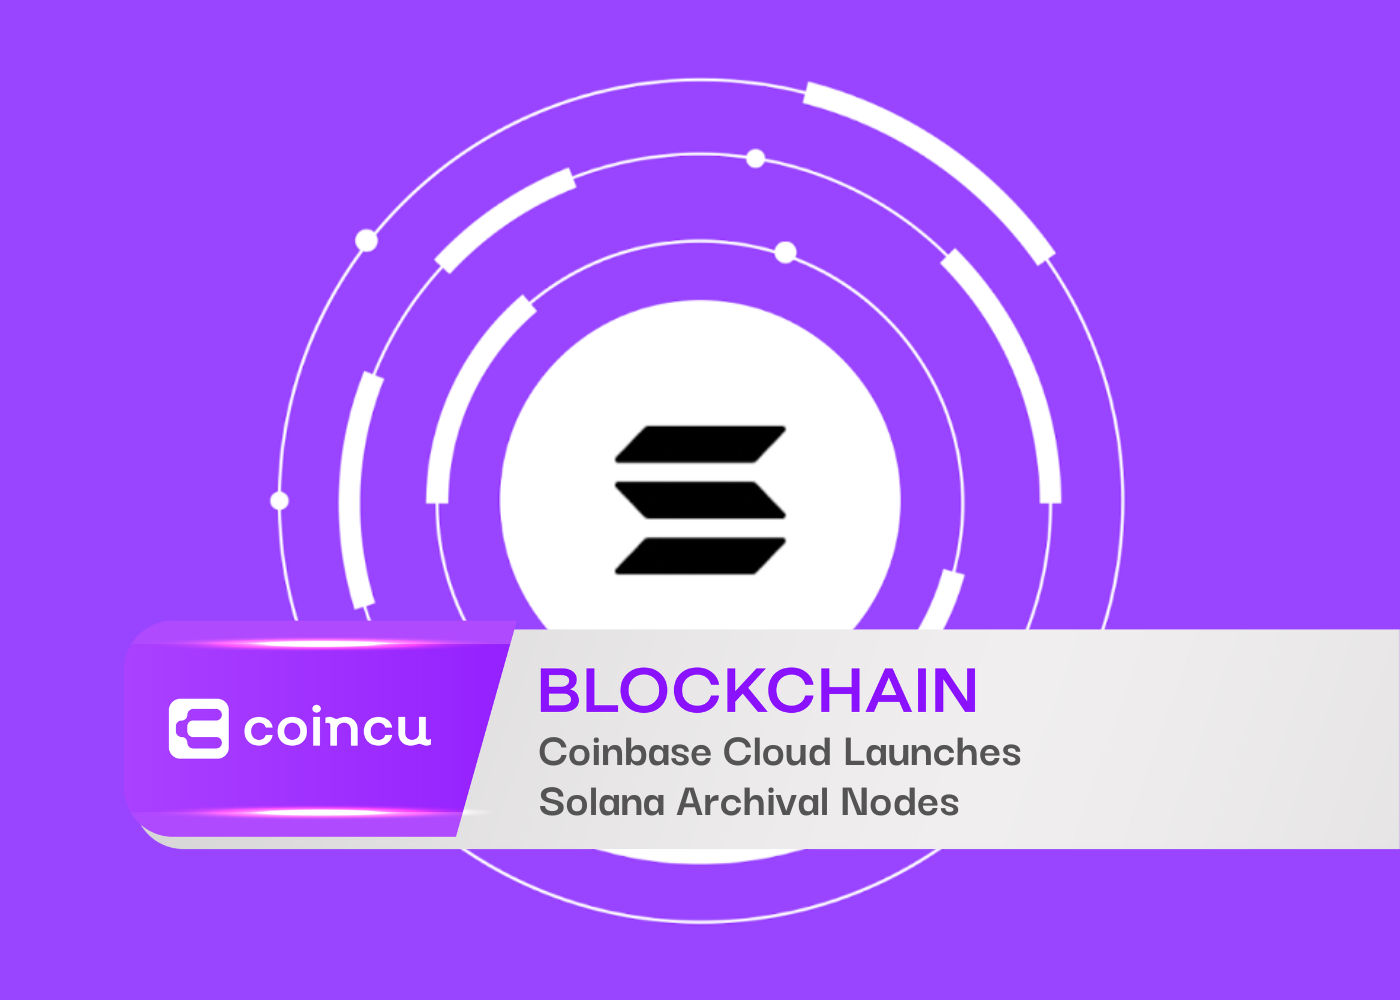 Coinbase Cloud Launches